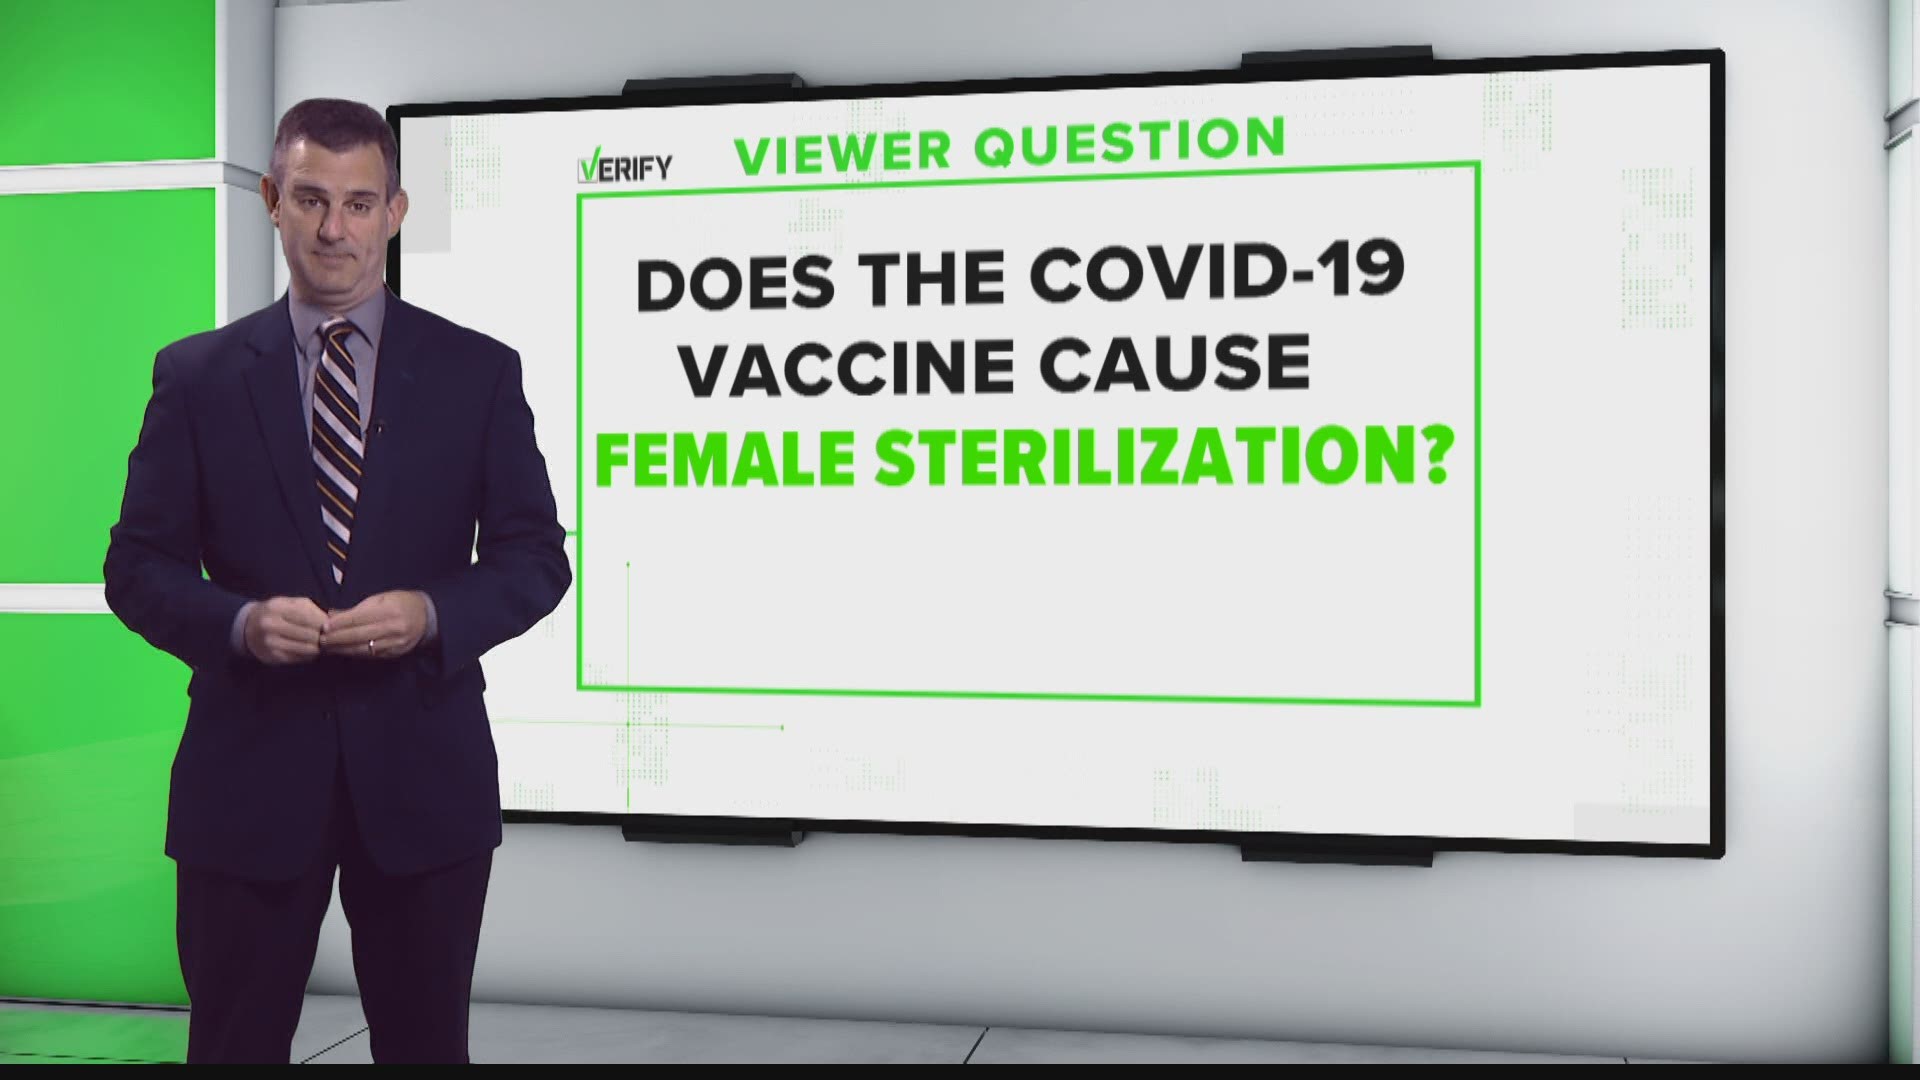 Our Senior investigative reporter Bob Segall says the most popular question right now is whether the vaccine will prevent women from being able to have children.